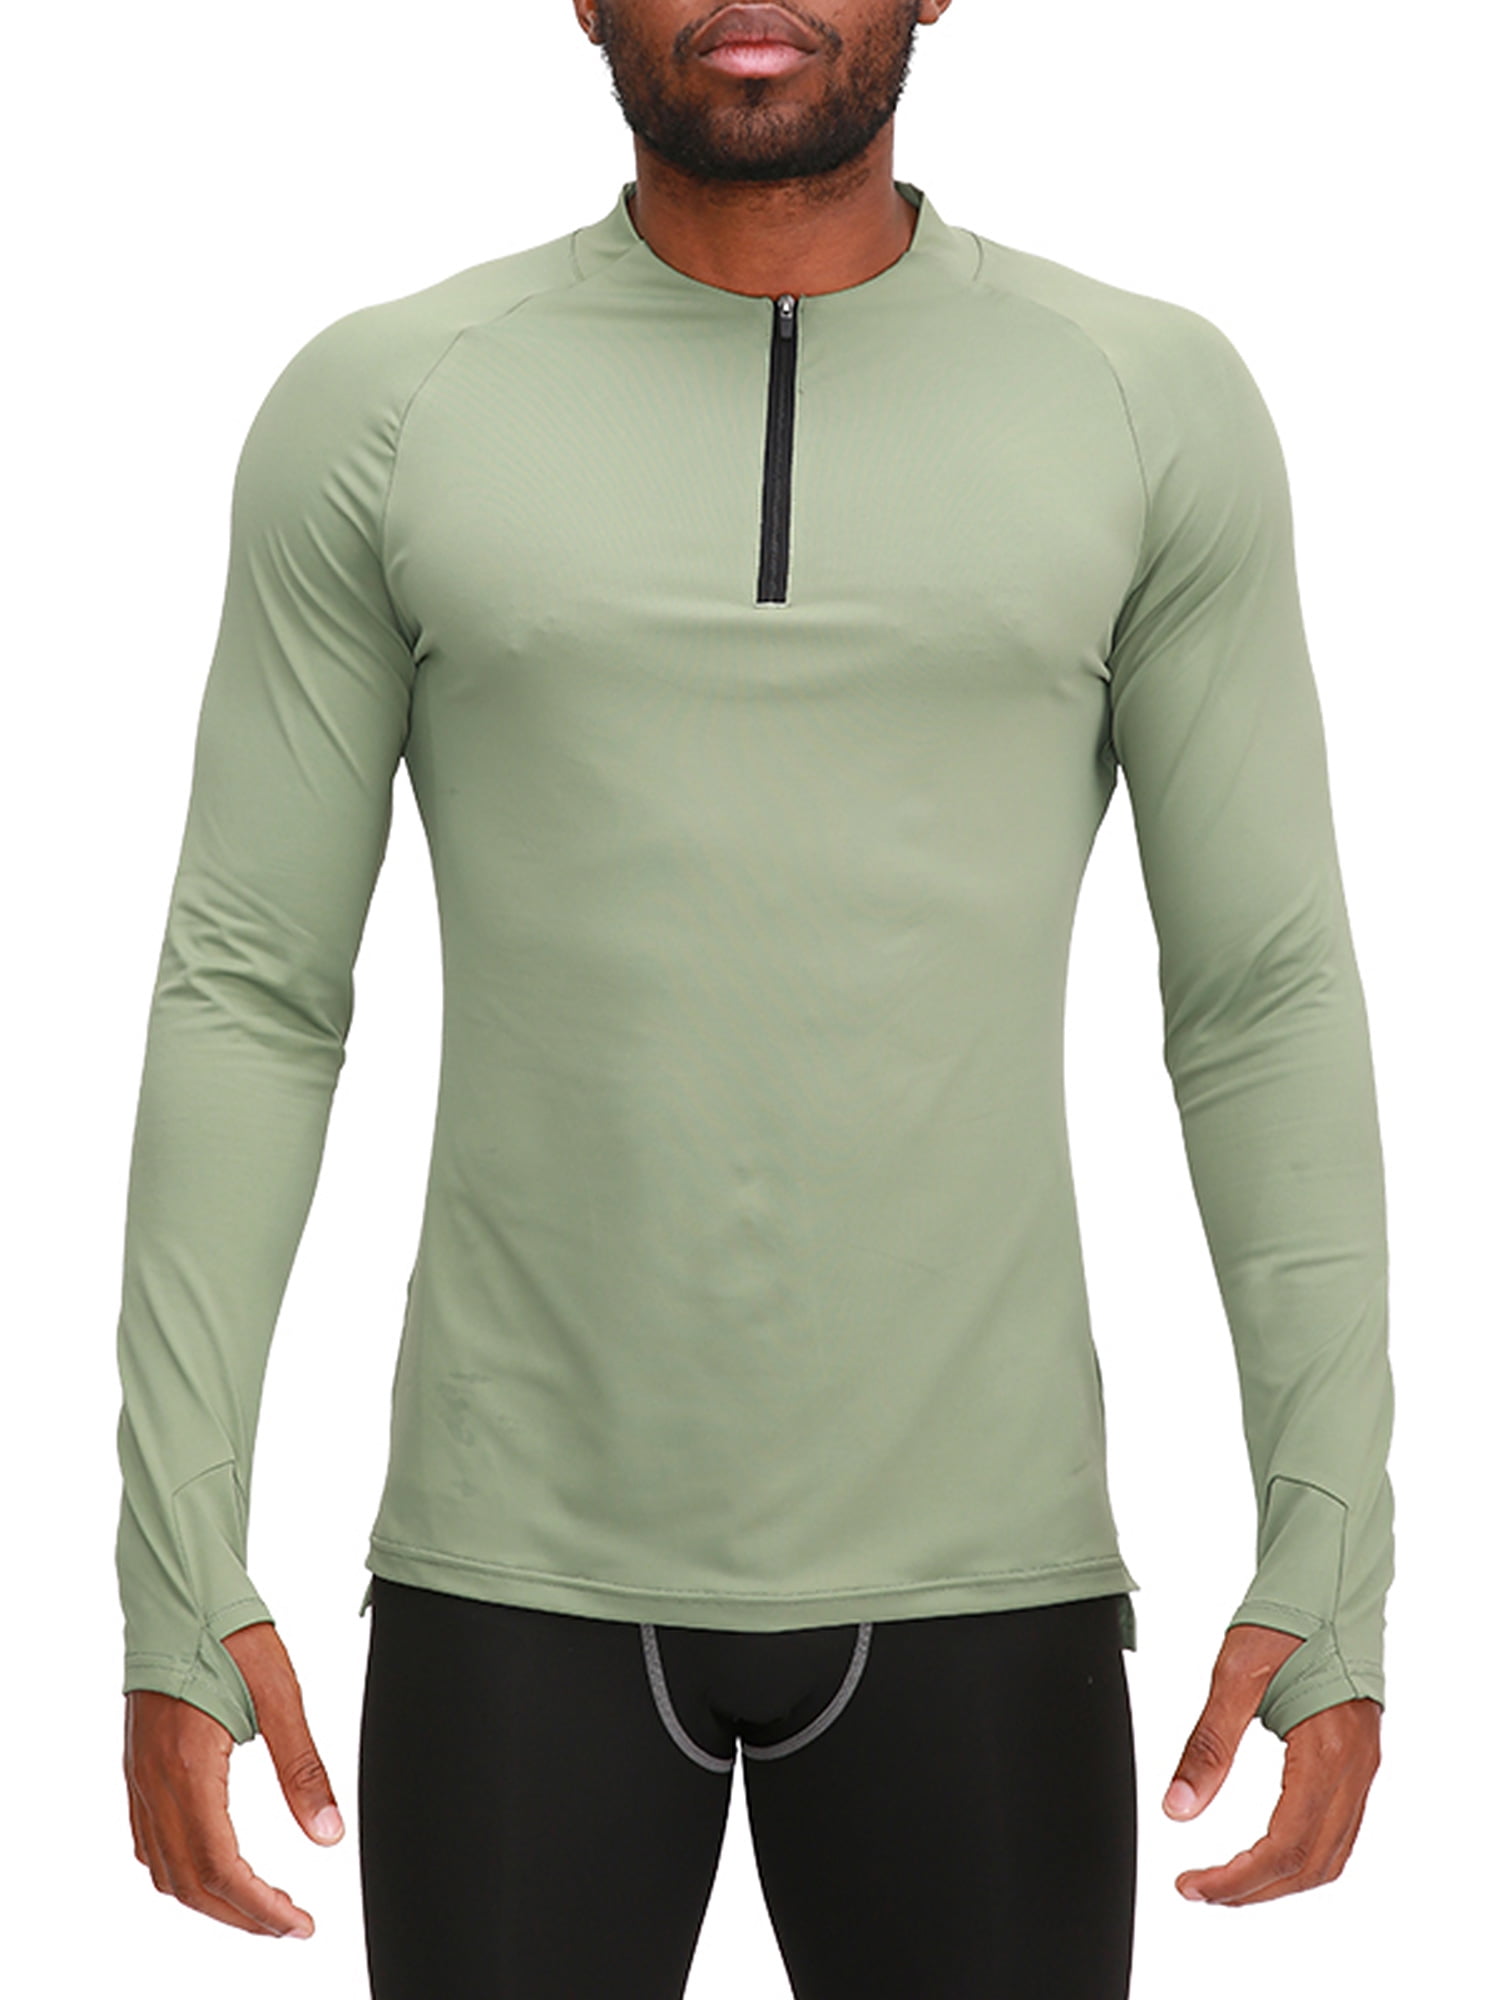 Mens Zip Mock Neck Compression Baselayer Workout T Shirts Long Sleeved Quick Dry 